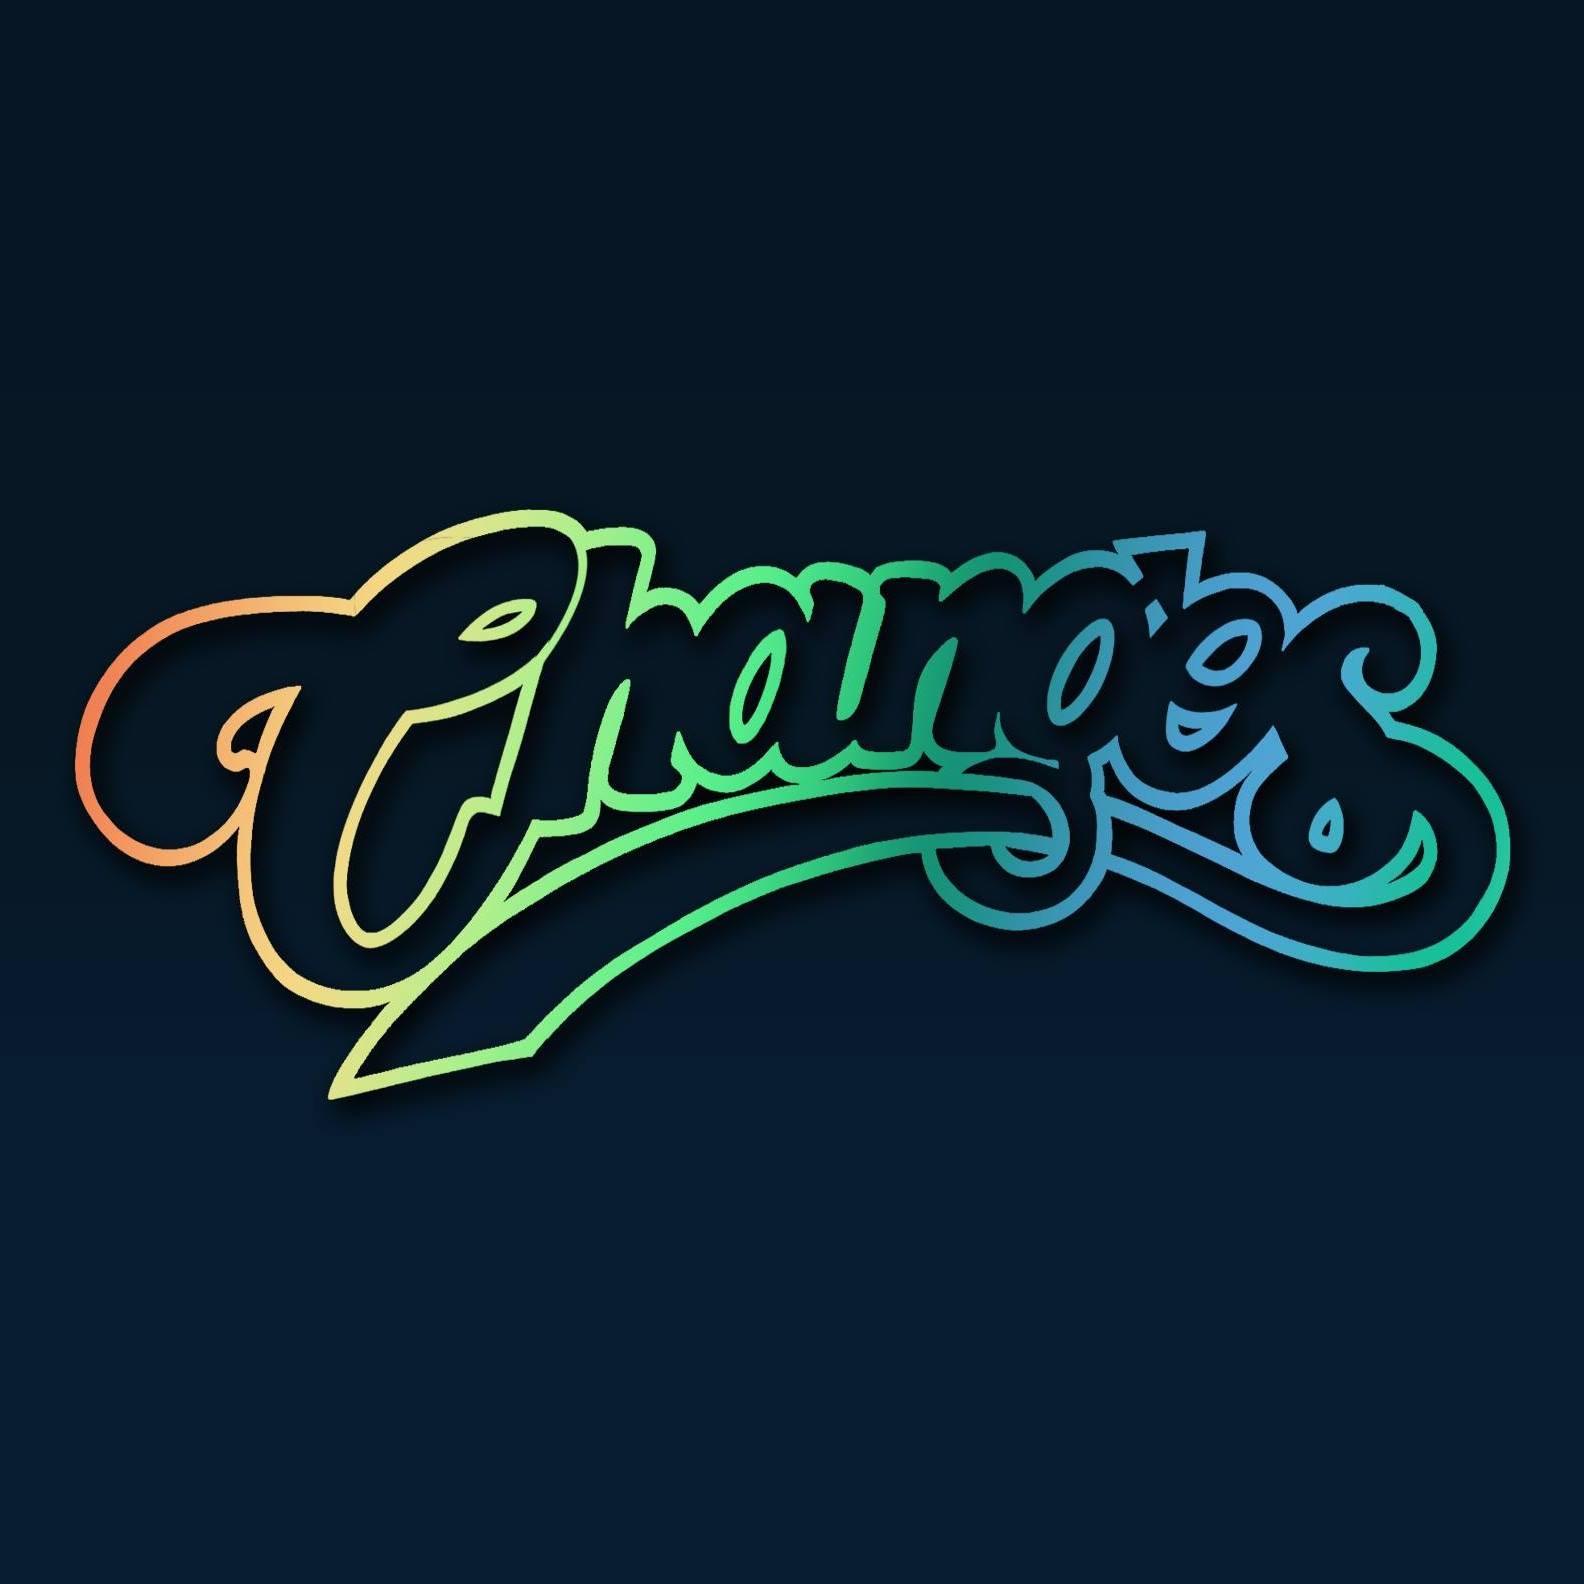 Company logo of Changes Bar & Grill